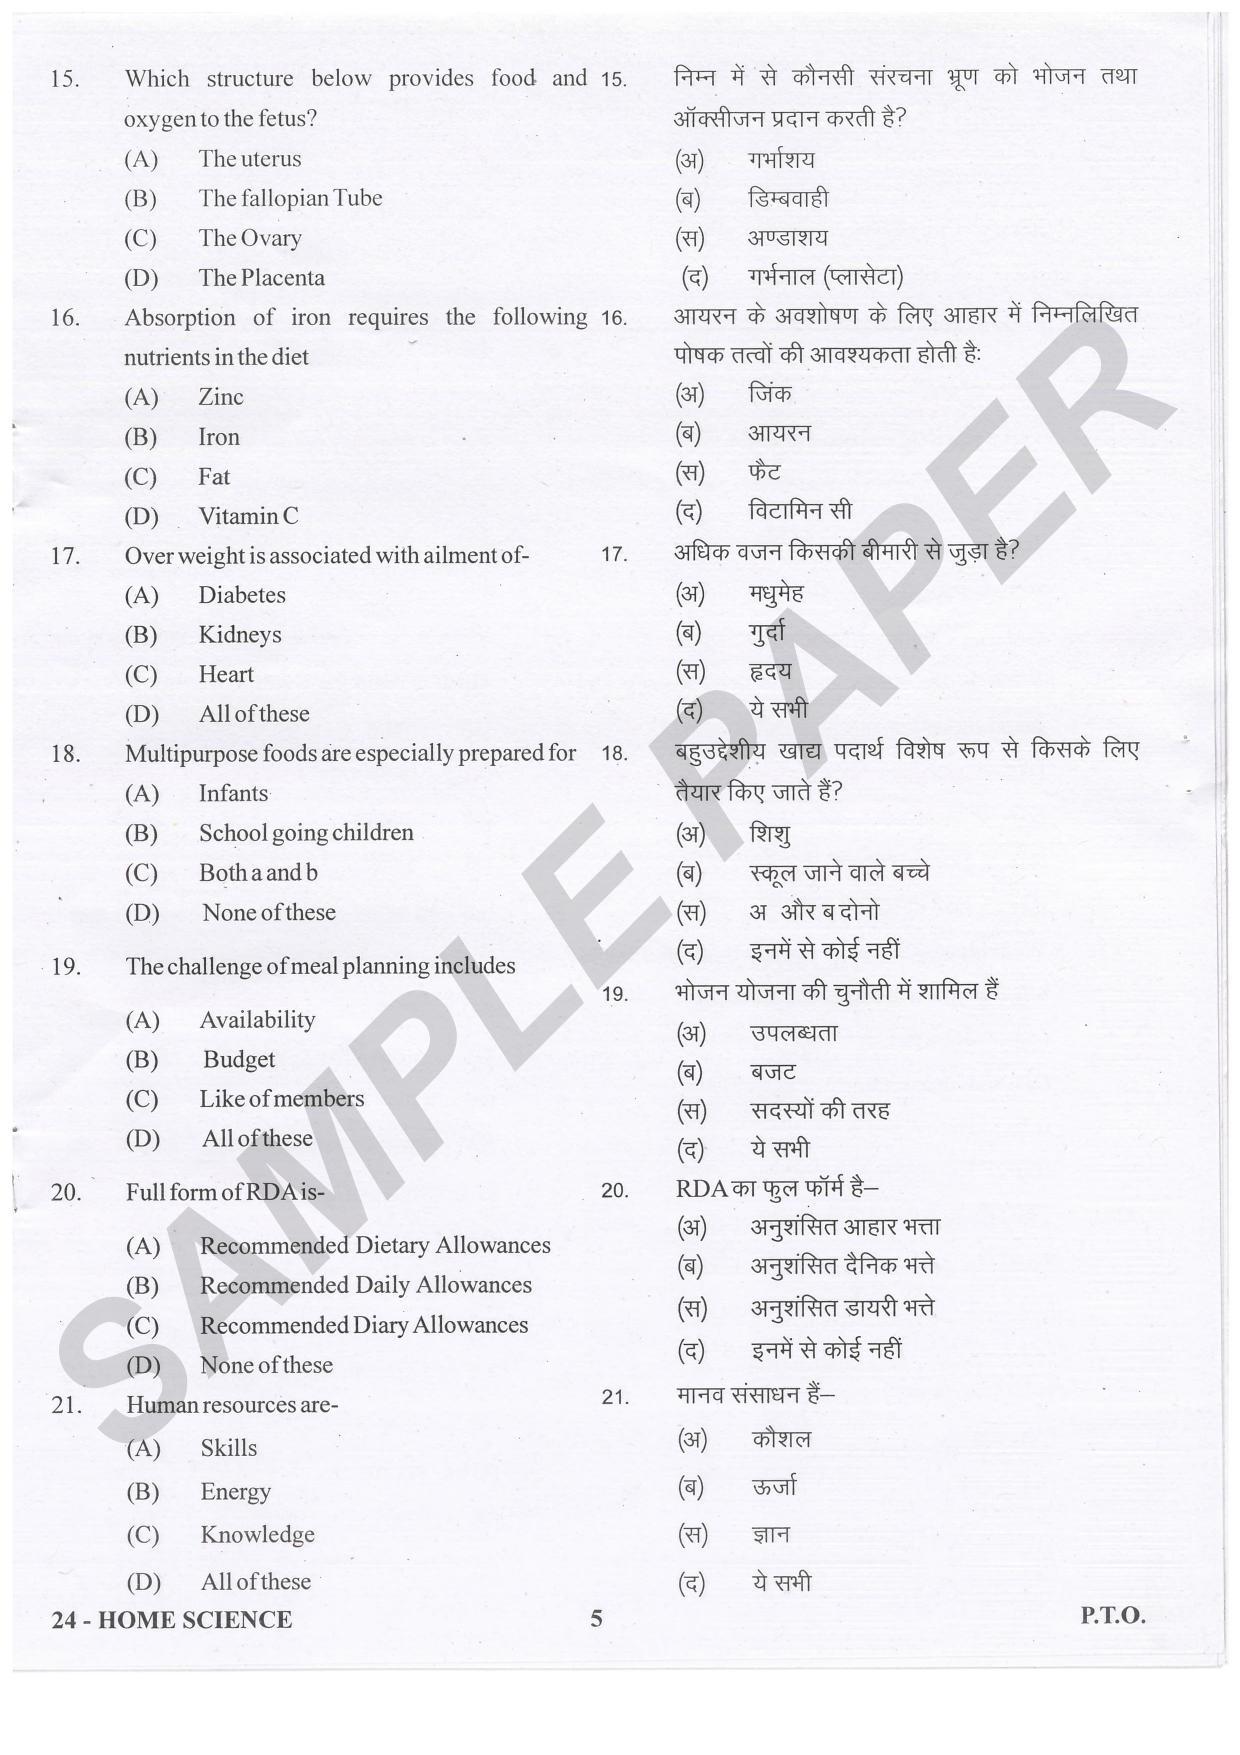 URATPG Home Science Sample Question Paper 2021 - Page 5